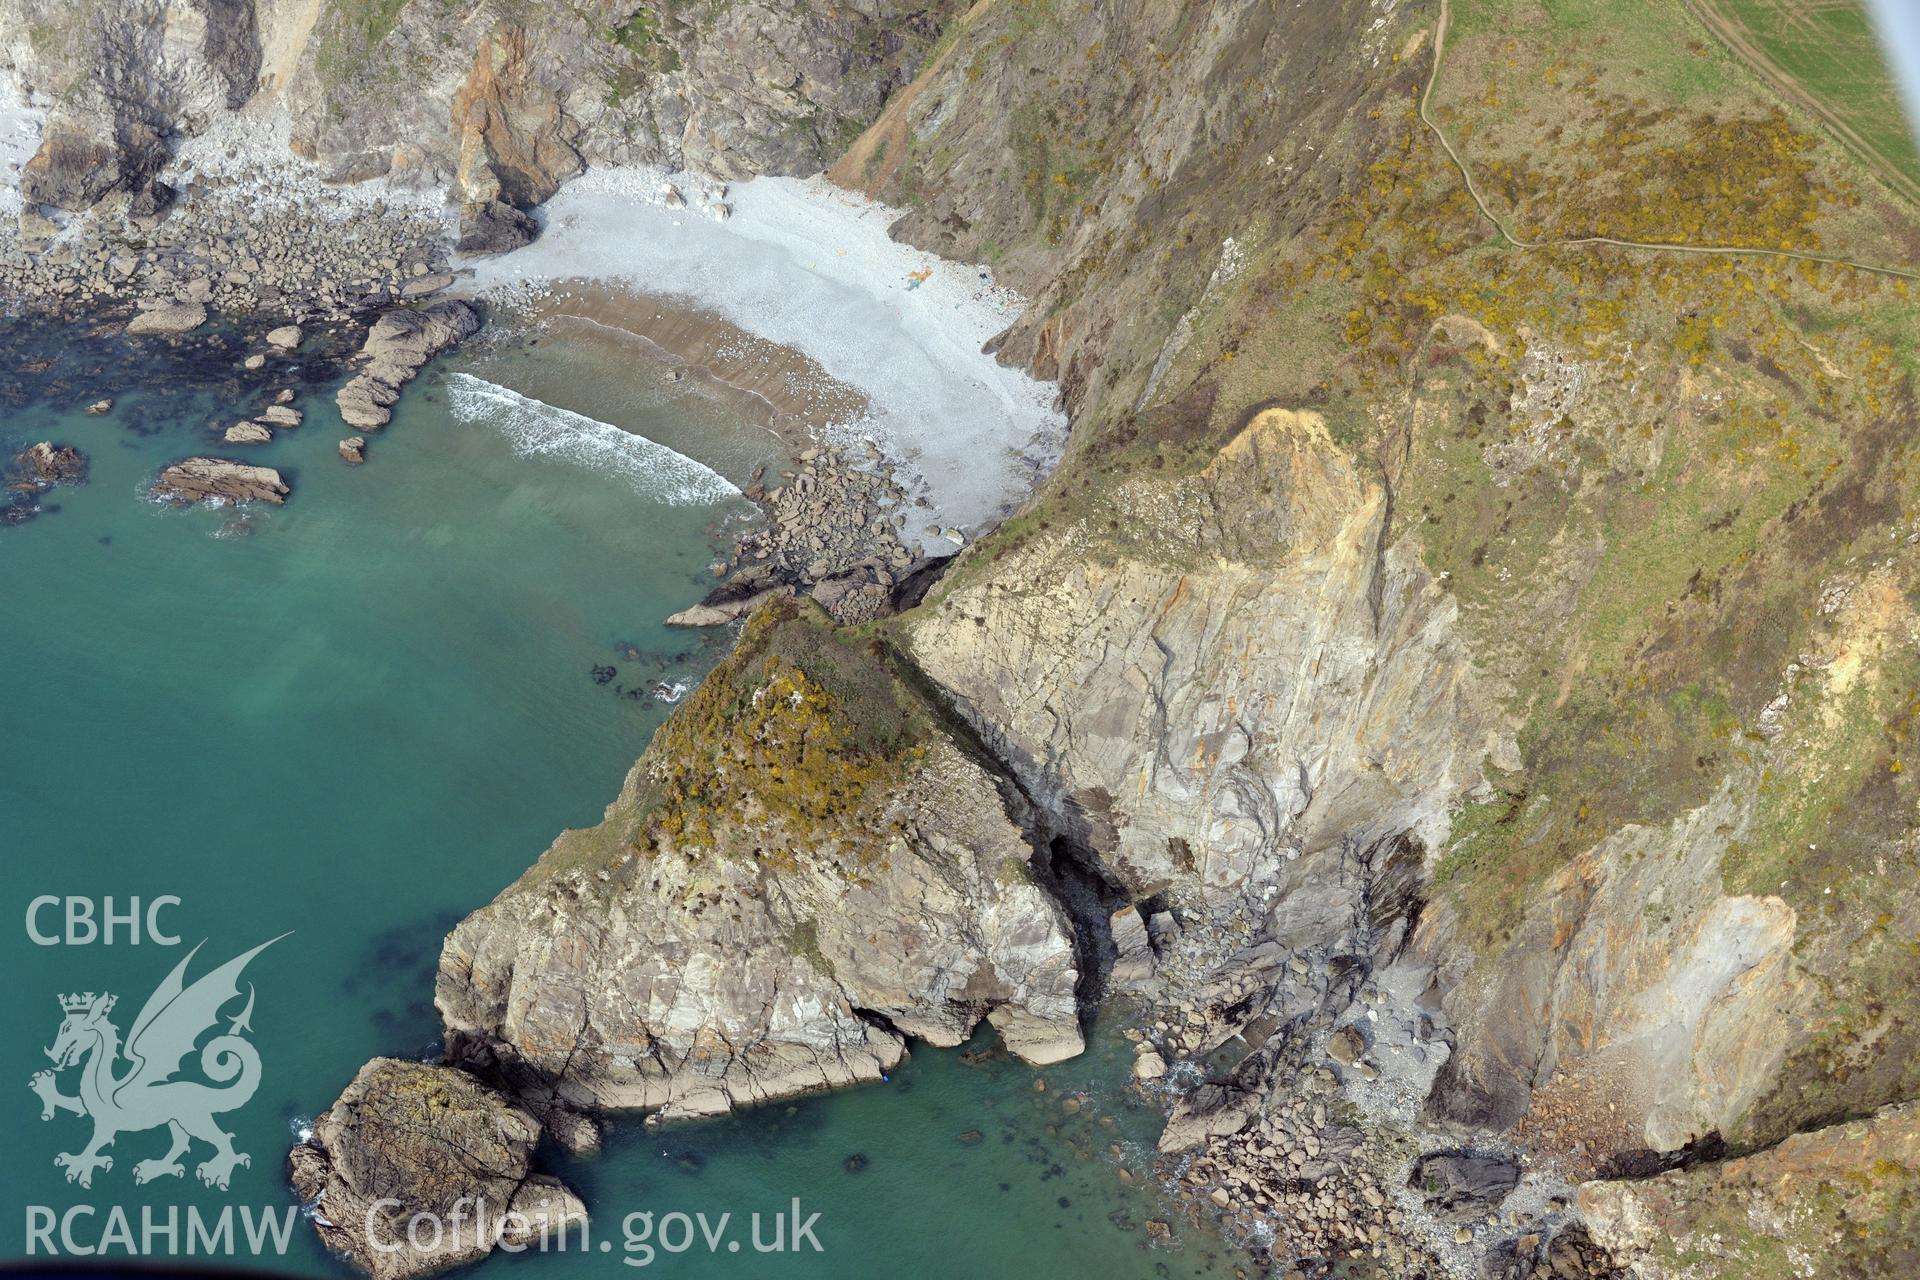 Royal Commission aerial photograph of Porth y Bwch promontory fort taken on 27th March 2017. Baseline aerial reconnaissance survey for the CHERISH Project. ? Crown: CHERISH PROJECT 2019. Produced with EU funds through the Ireland Wales Co-operation Programme 2014-2020. All material made freely available through the Open Government Licence.